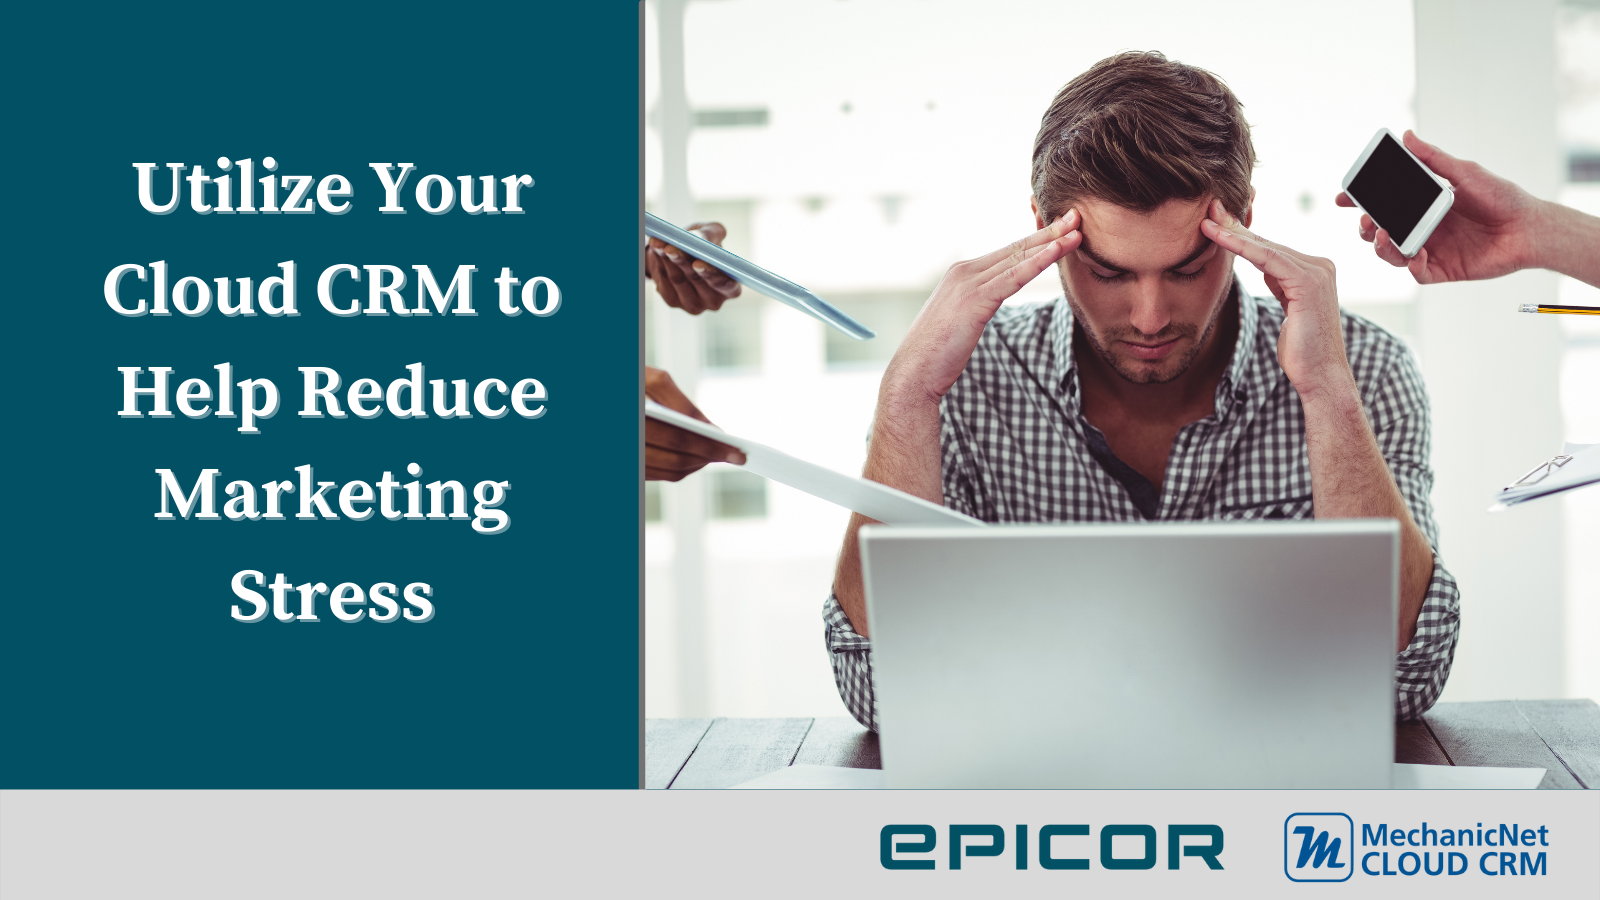 stressed man image, text: utilize your cloud crm to help reduce marketing stress